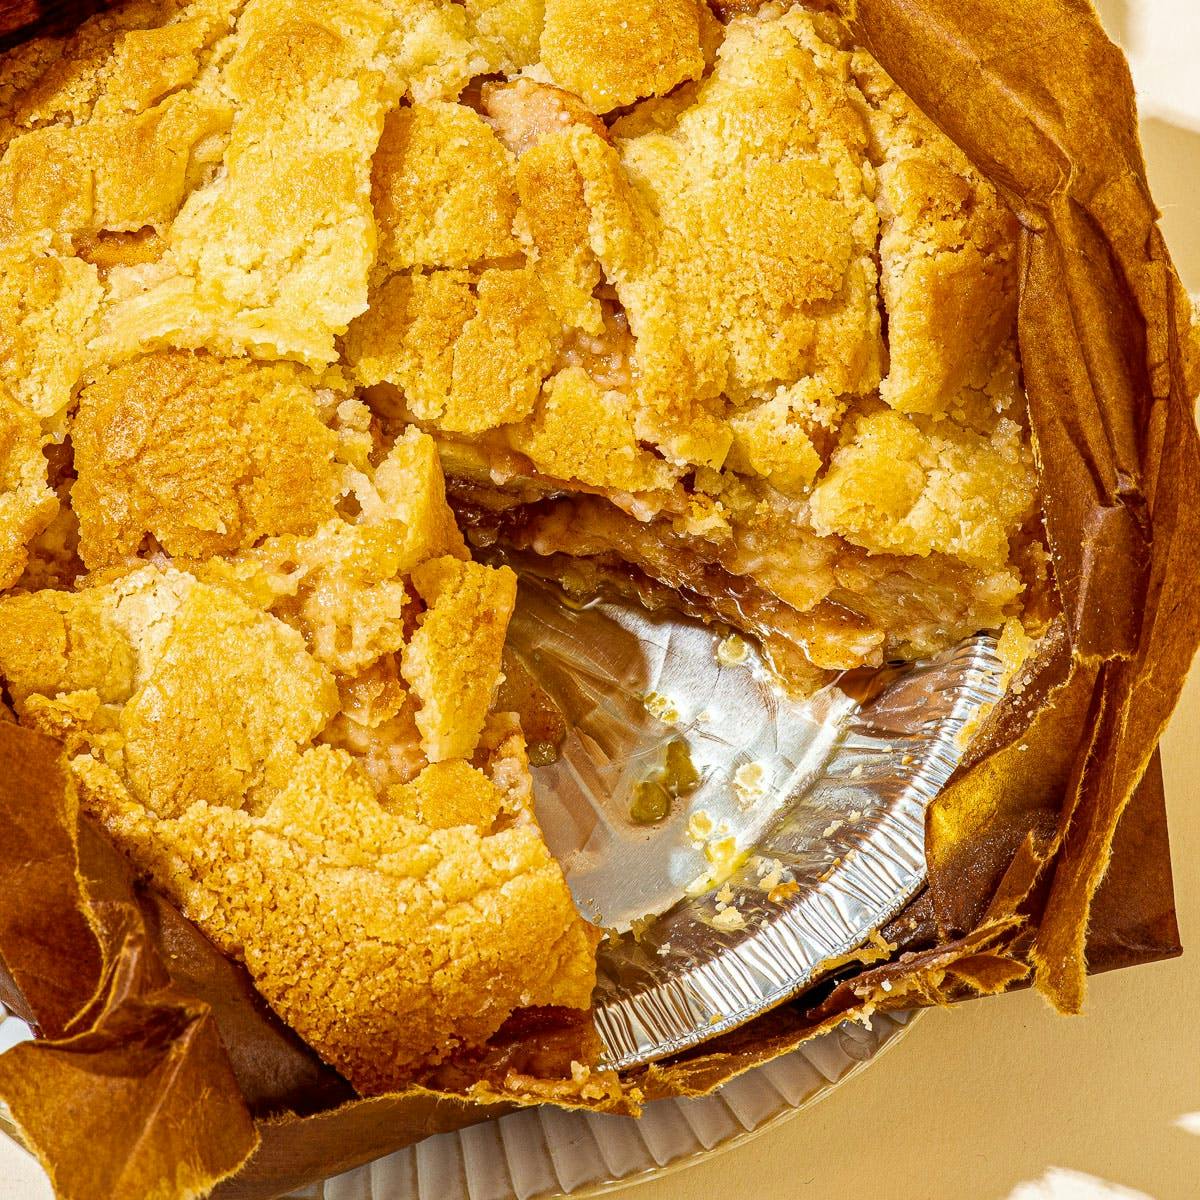 https://goldbelly.imgix.net/uploads/showcase_media_asset/image/66138/8-original-apple-pie-baked-in-a-paper-bag-ground-shipping-included.4d9a3aceff5519e87eacf8d48872a686.jpg?ixlib=rails-3.0.2